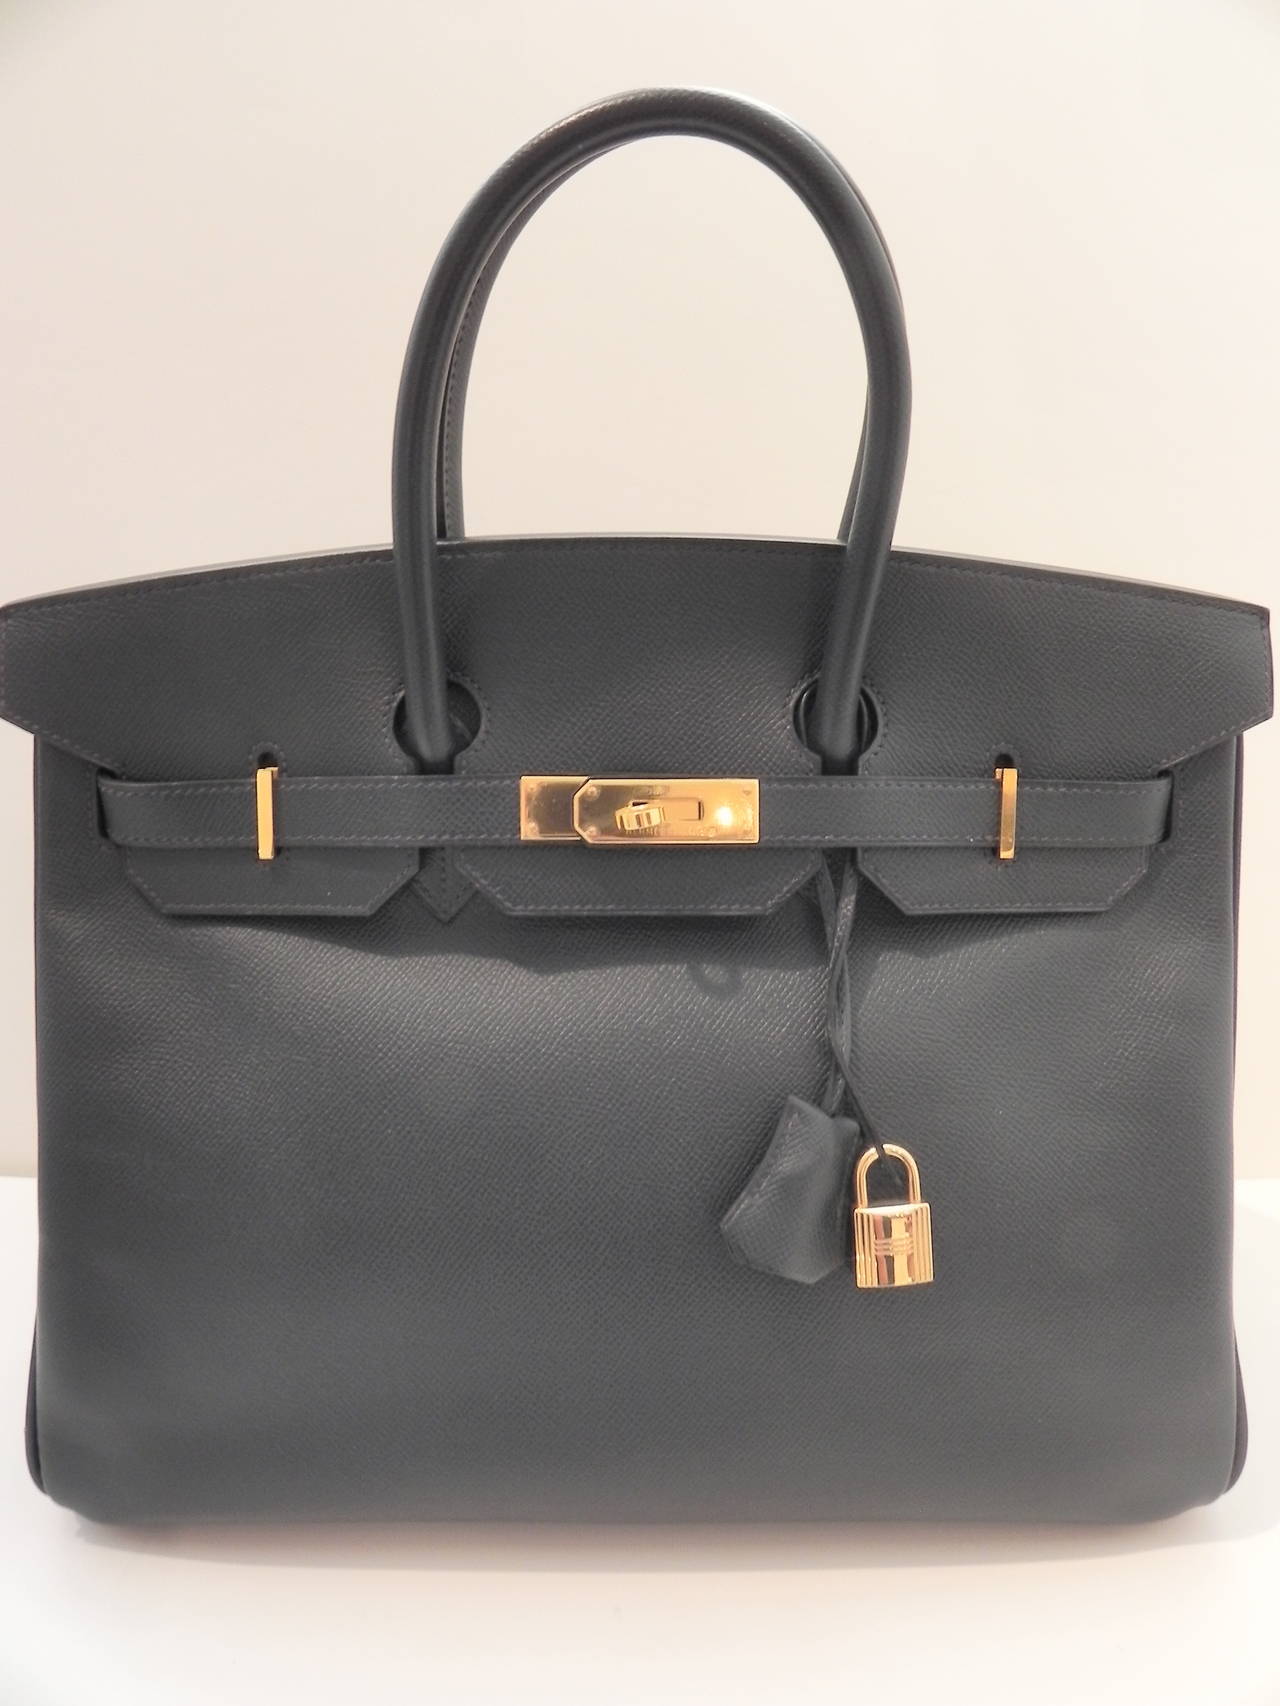 Hermes Birkin Dark Navy Blue Couchvel 35 cm .

Circa:2000    D Square year 

Excellent condition and with no wear on corners .

Gold Hardware with lock and key .

Dust Bag and original Hermes Box